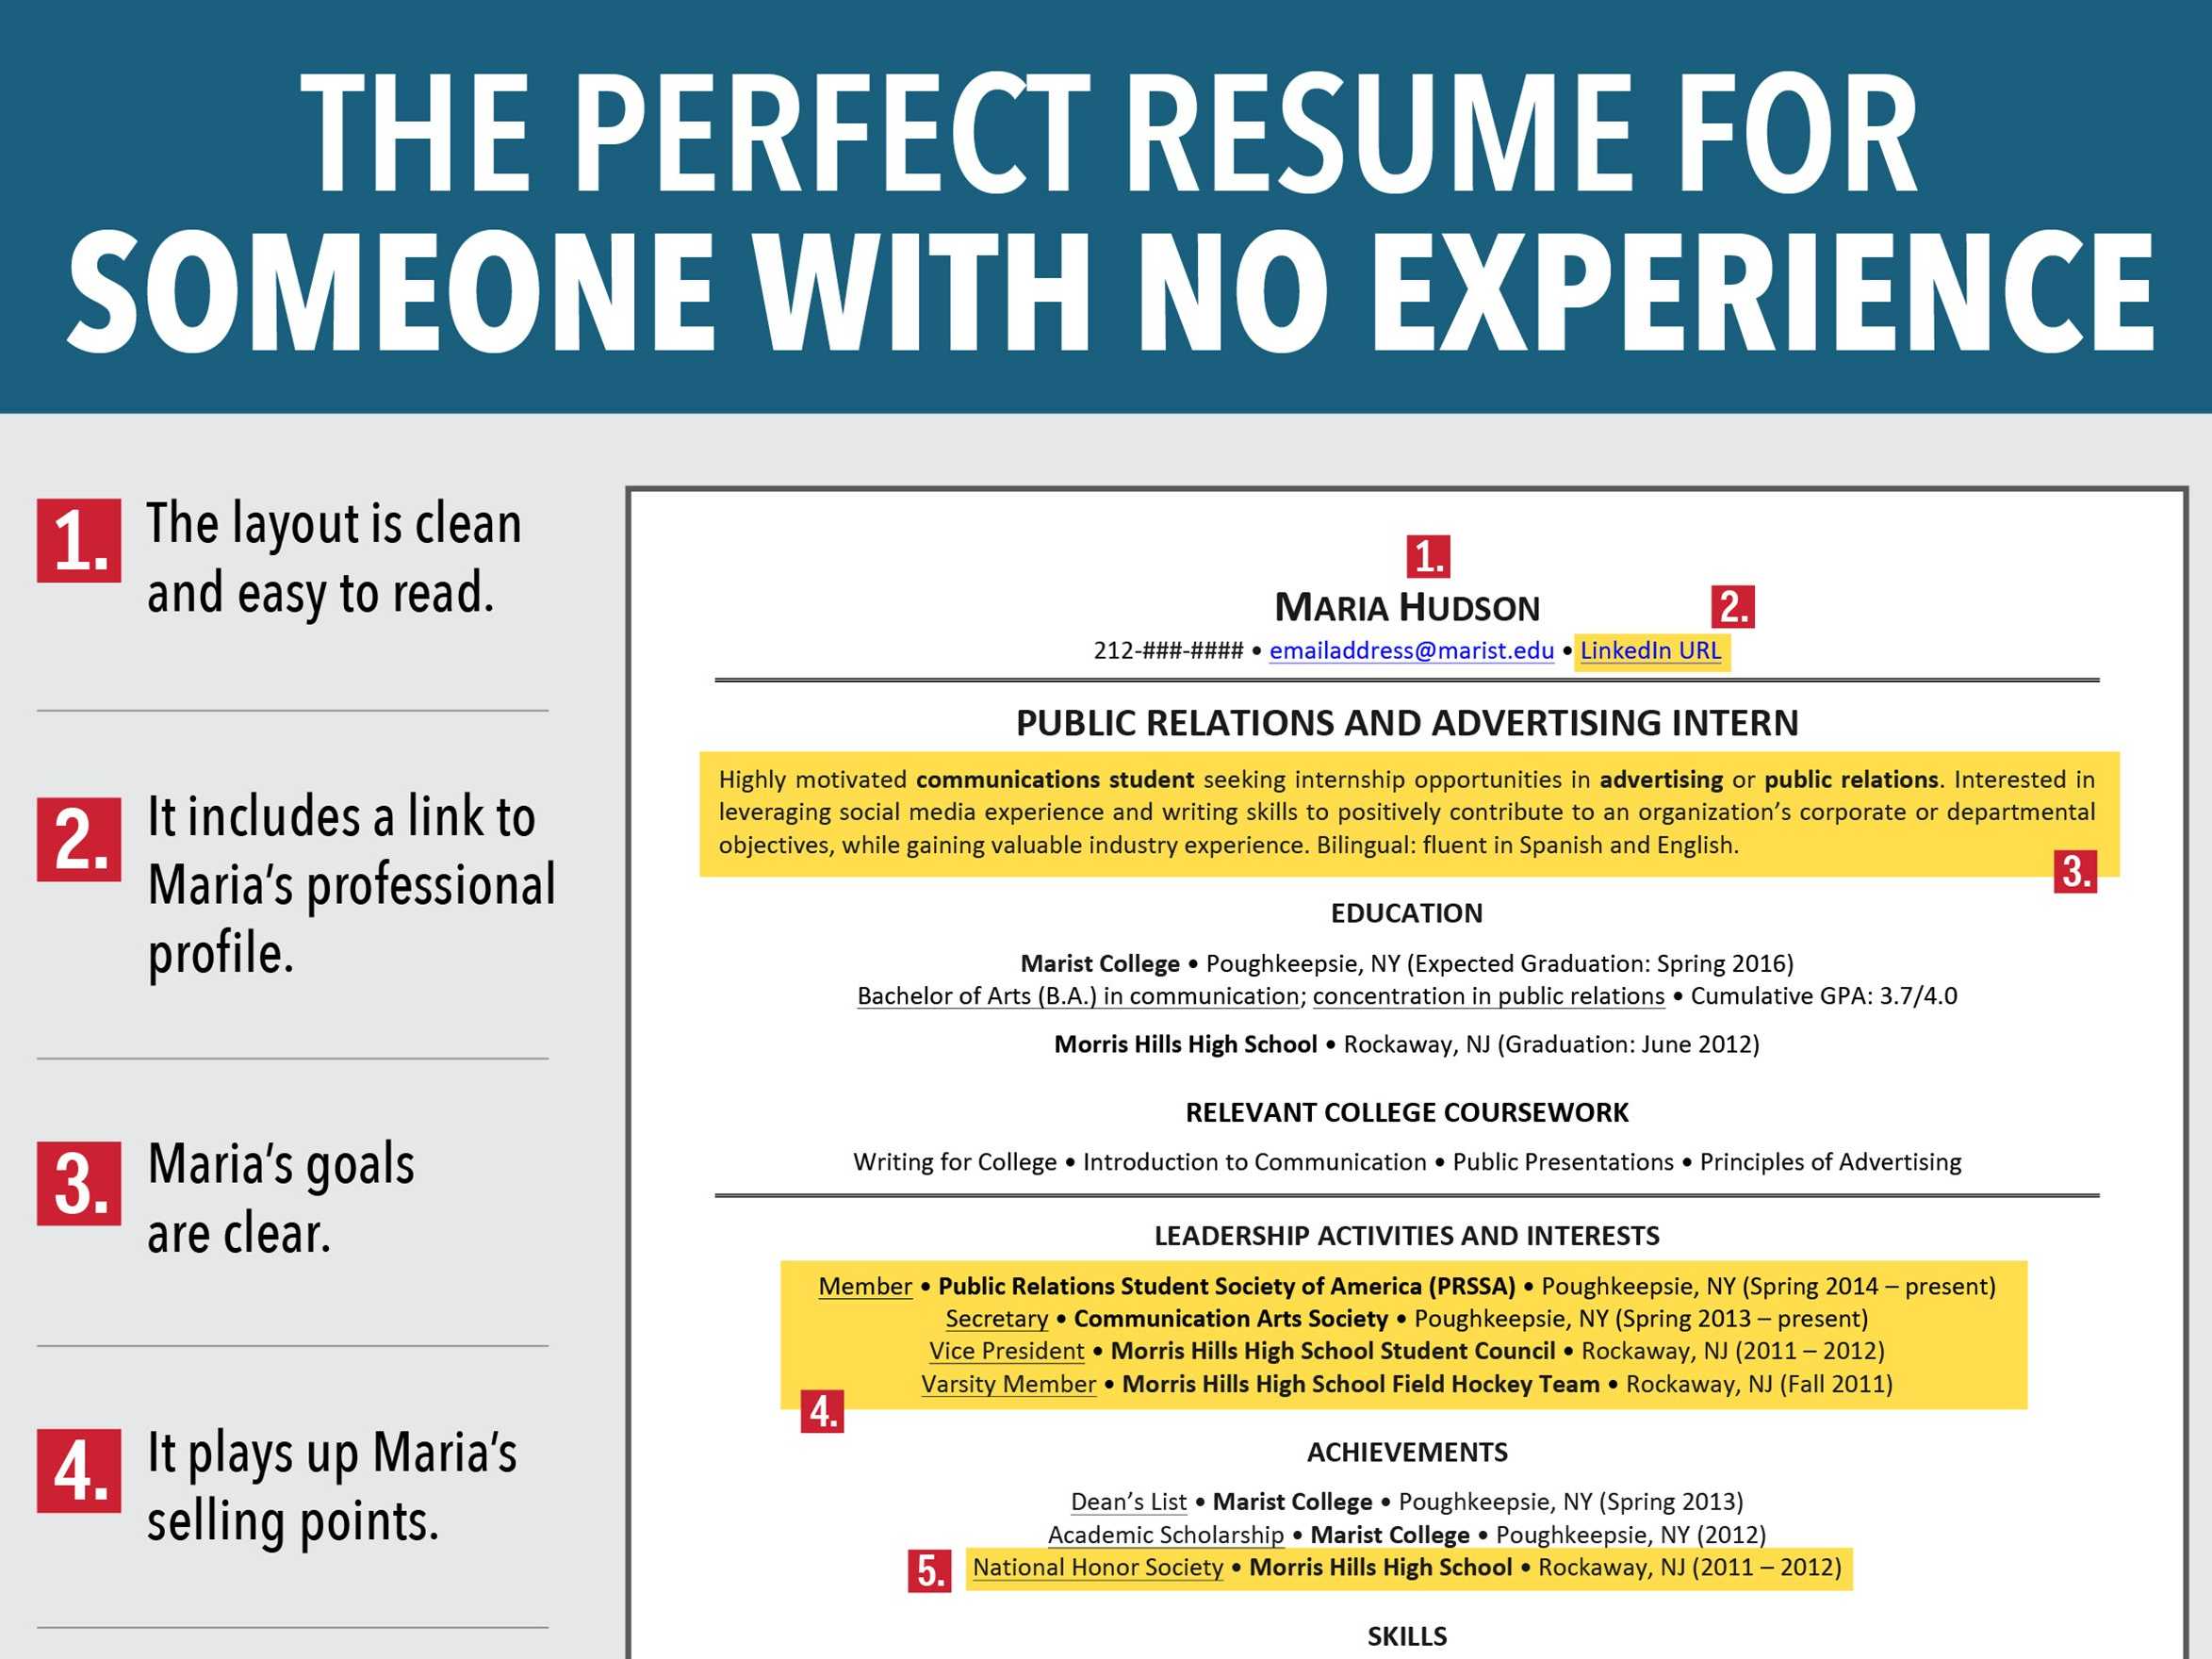 Resume For Job Seeker With No Experience Business Insider